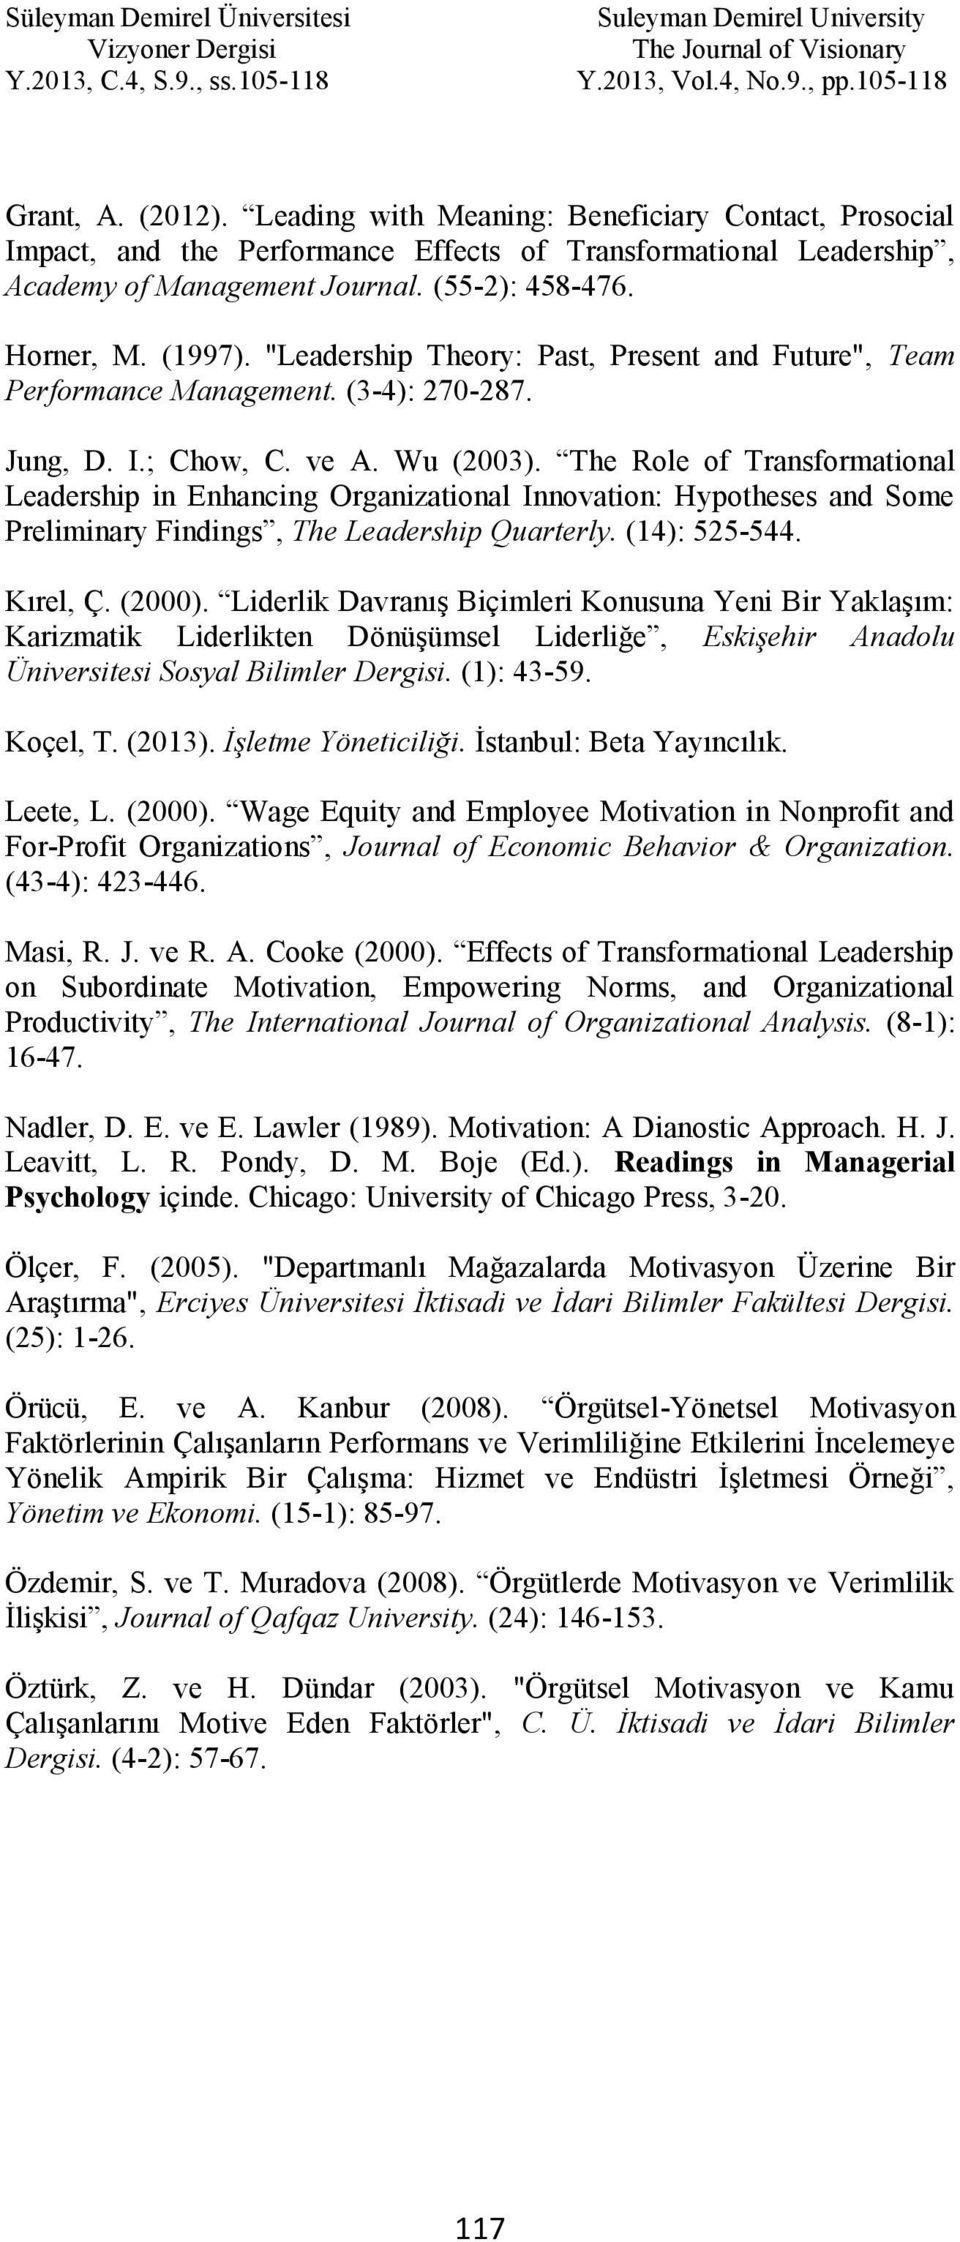 The Role of Transformational Leadership in Enhancing Organizational Innovation: Hypotheses and Some Preliminary Findings, The Leadership Quarterly. (14): 525-544. Kırel, Ç. (2000).